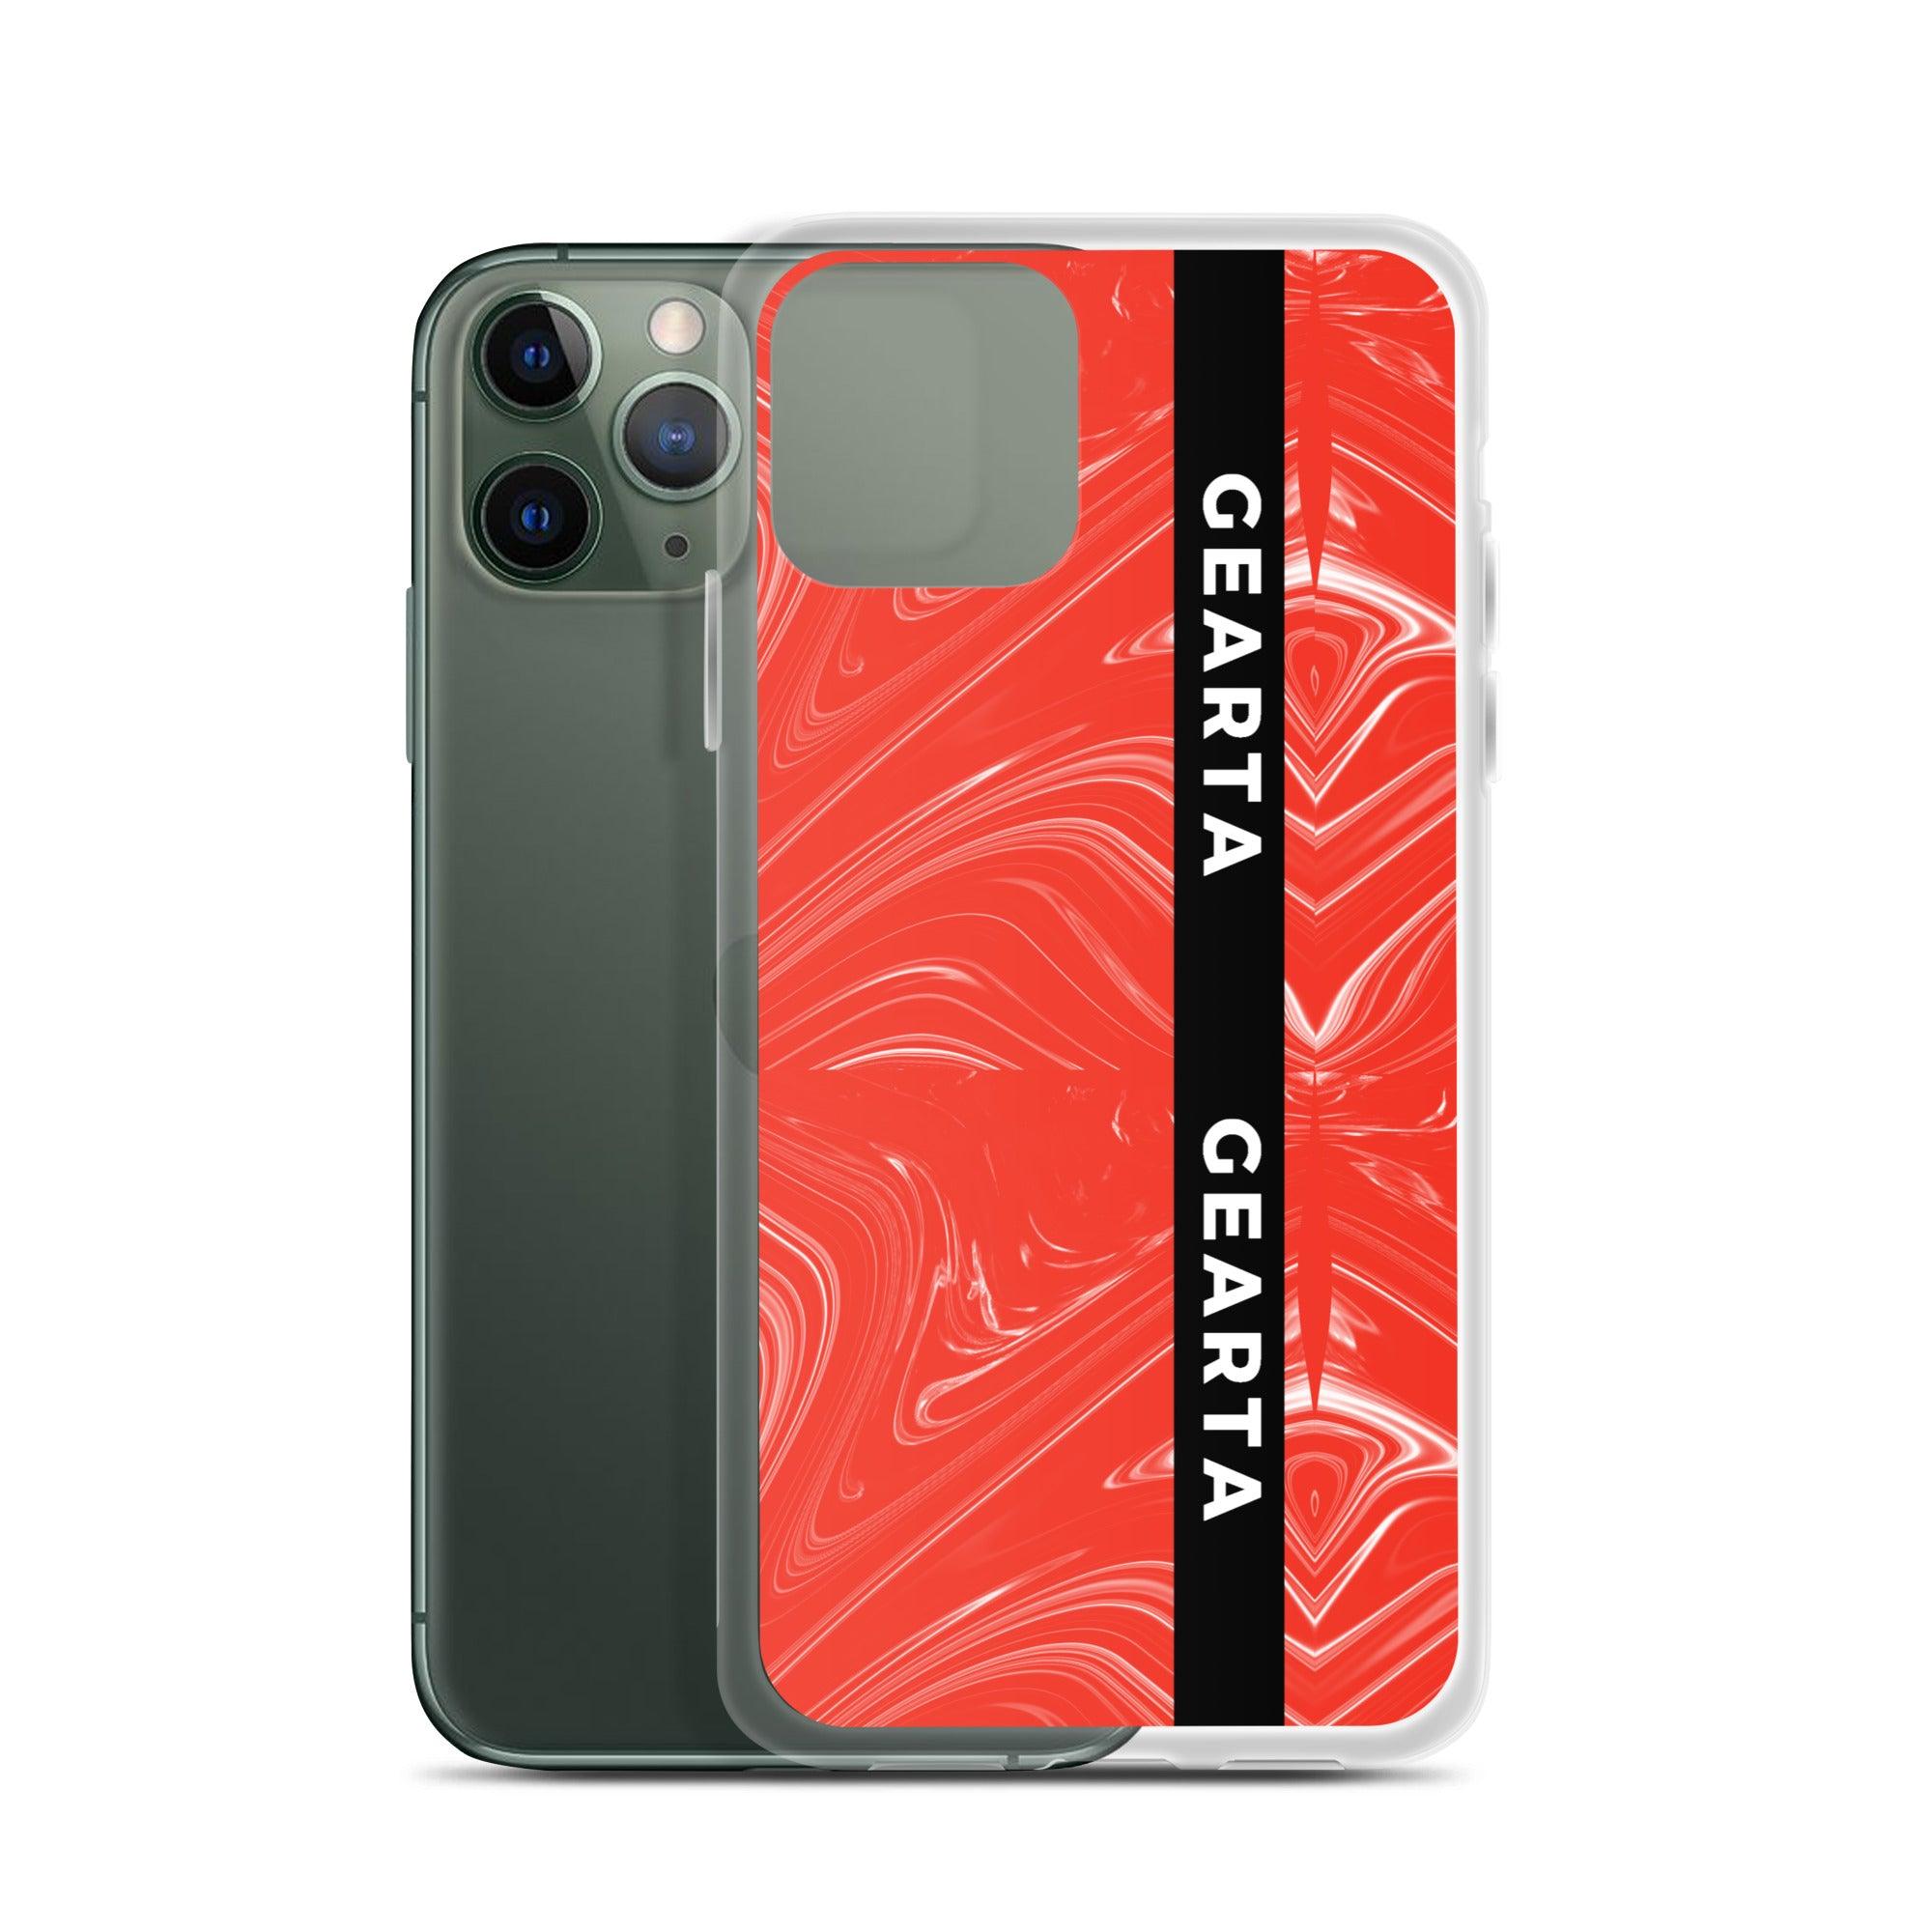 GEARTA - Red Textured Clear iPhone Case